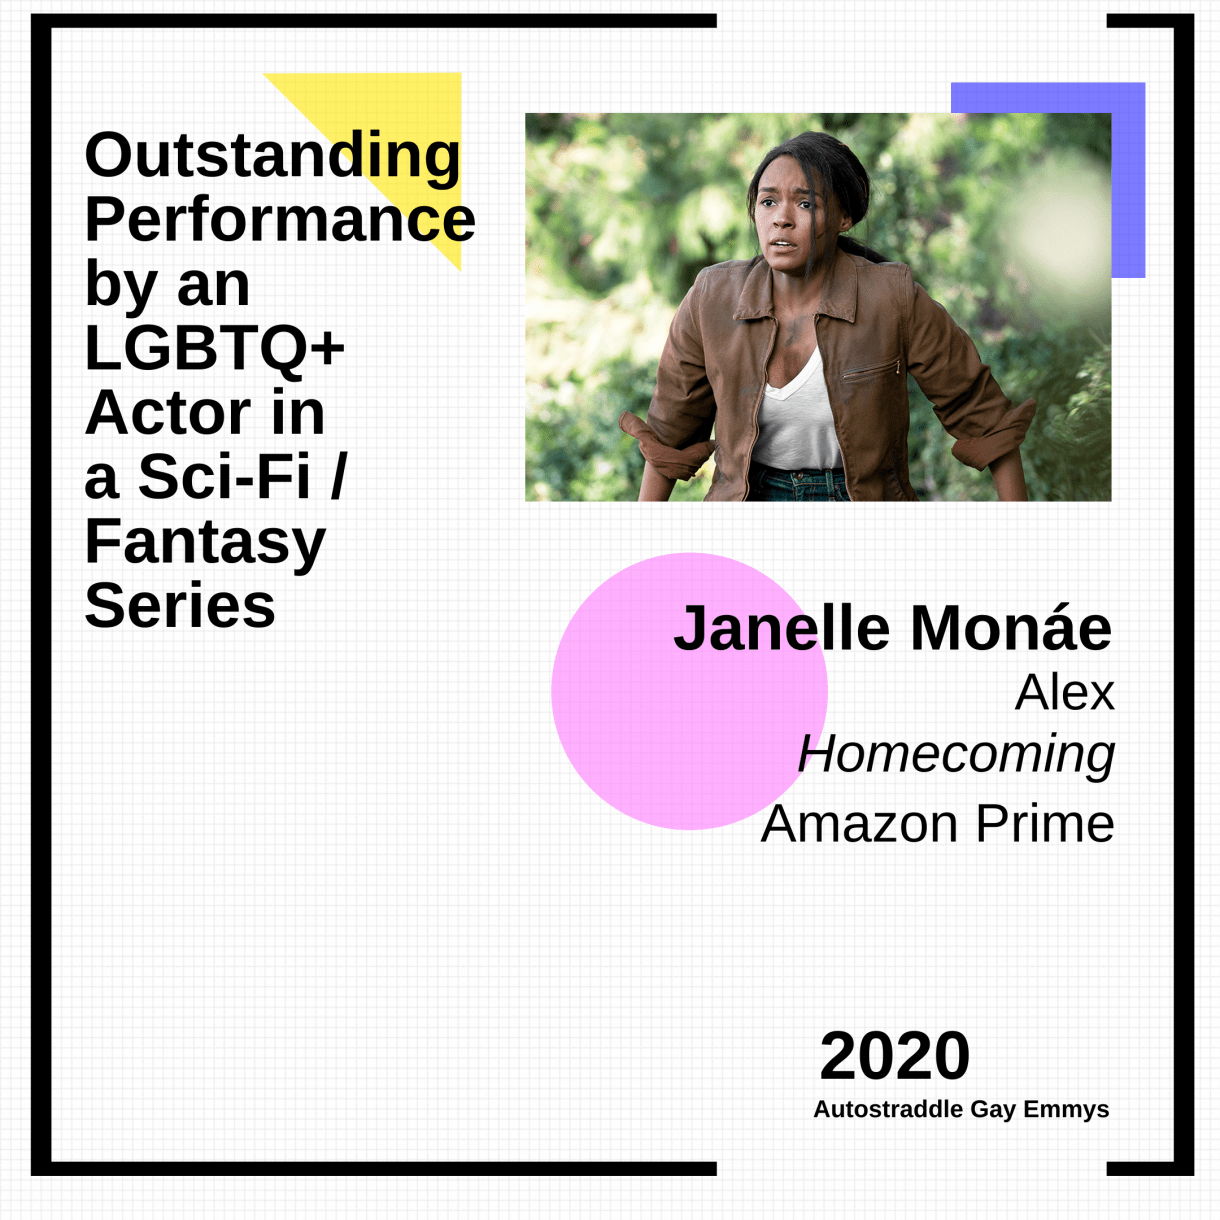 Colorful graphic announcing Outstanding Performance by an LGBTQ+ Actor in a Sci-Fi/Fantasy Show: Janelle Monae as Alex, Homecoming. Picture of Janelle Monae as Alex, wearing a white top and green jacket in front of some trees.